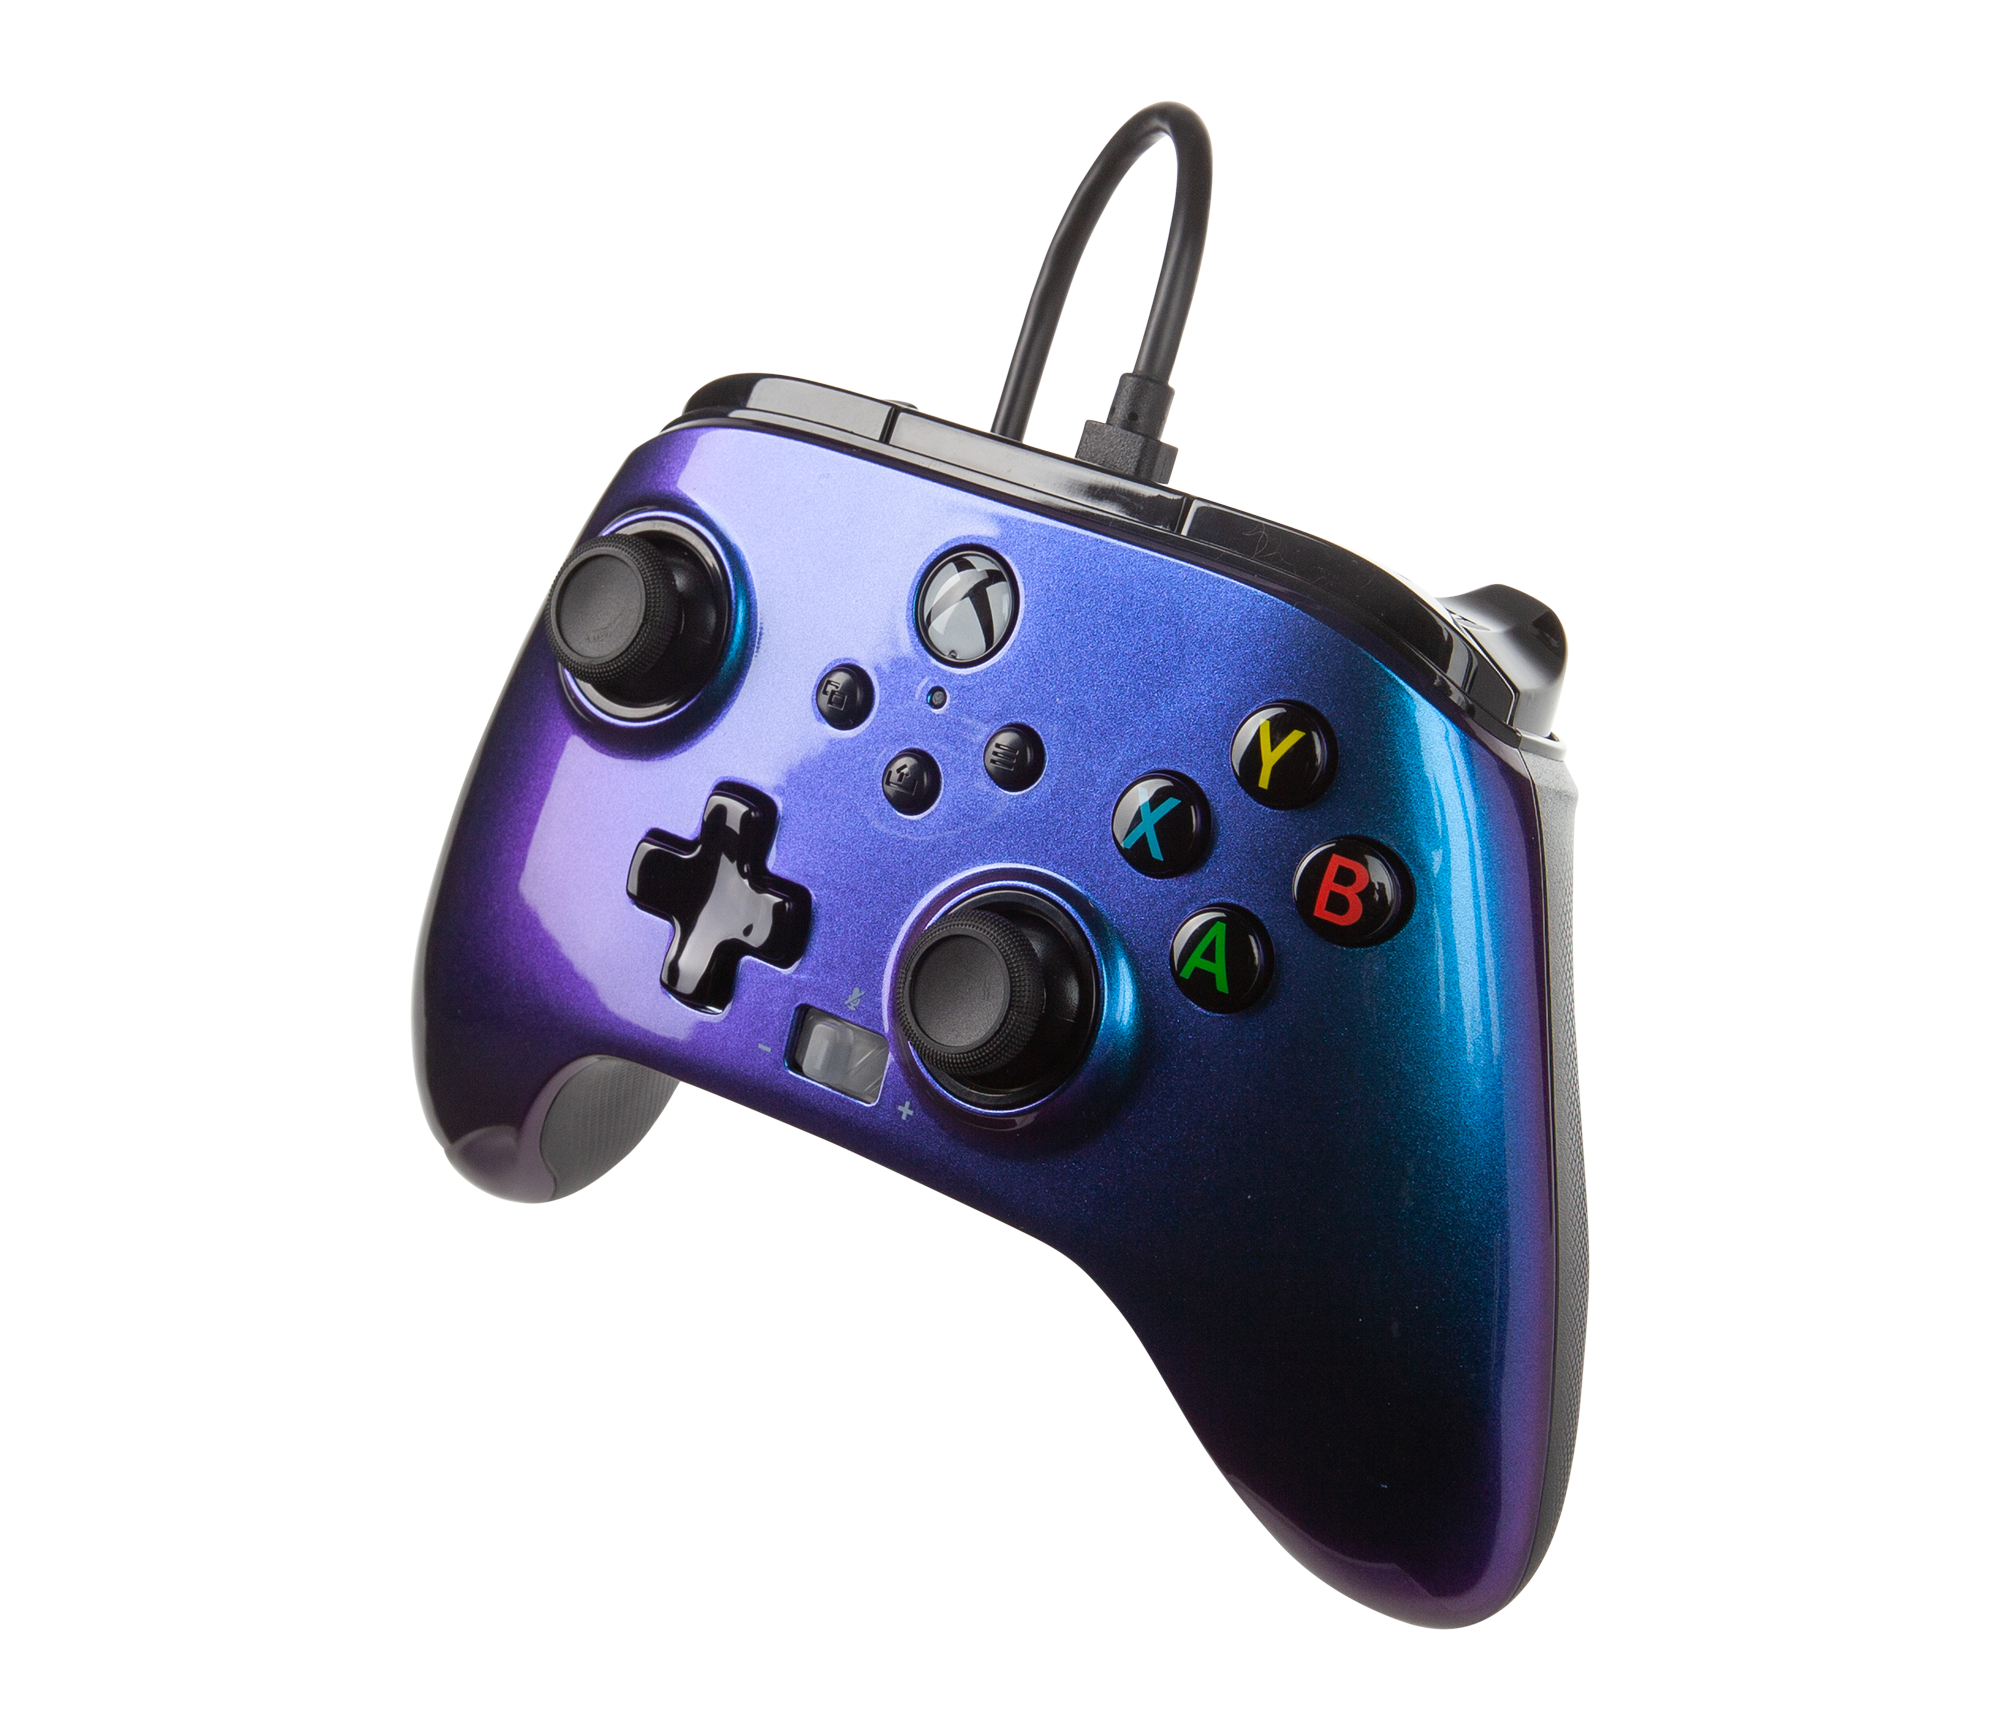 PowerA Enhanced Wired Controller for Xbox Series X/S Nebula